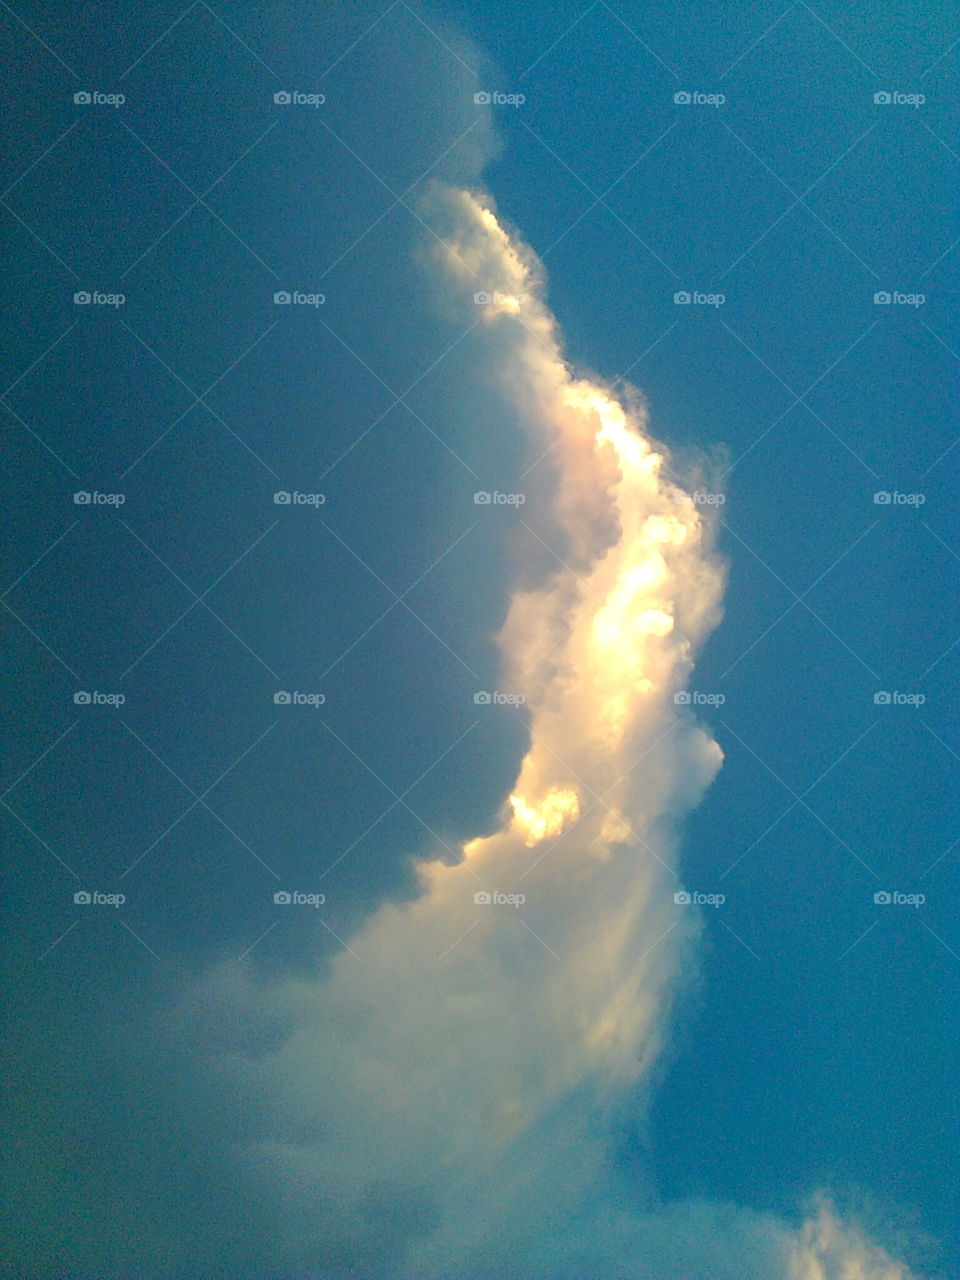 an imaginary angel in sky. its is a view of clouds in summer sky, the clouds form a view of angel